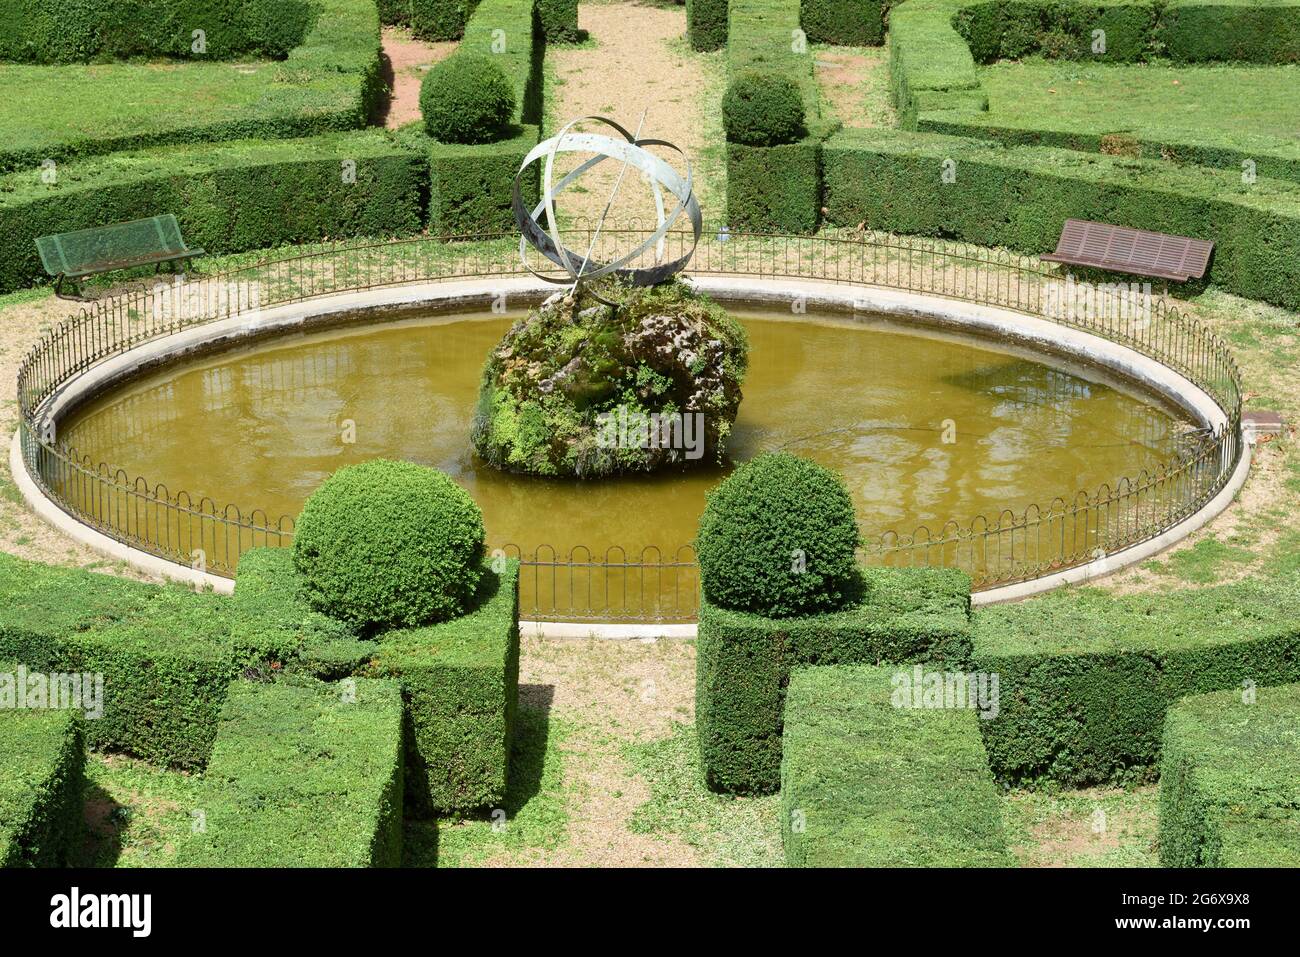 Round Basin, Garden Pool & Fountain in the Centre of the Formal Le Notre Garden with Astrolabe Sculpture at Entrecasteaux Chateau Var Provence France Stock Photo